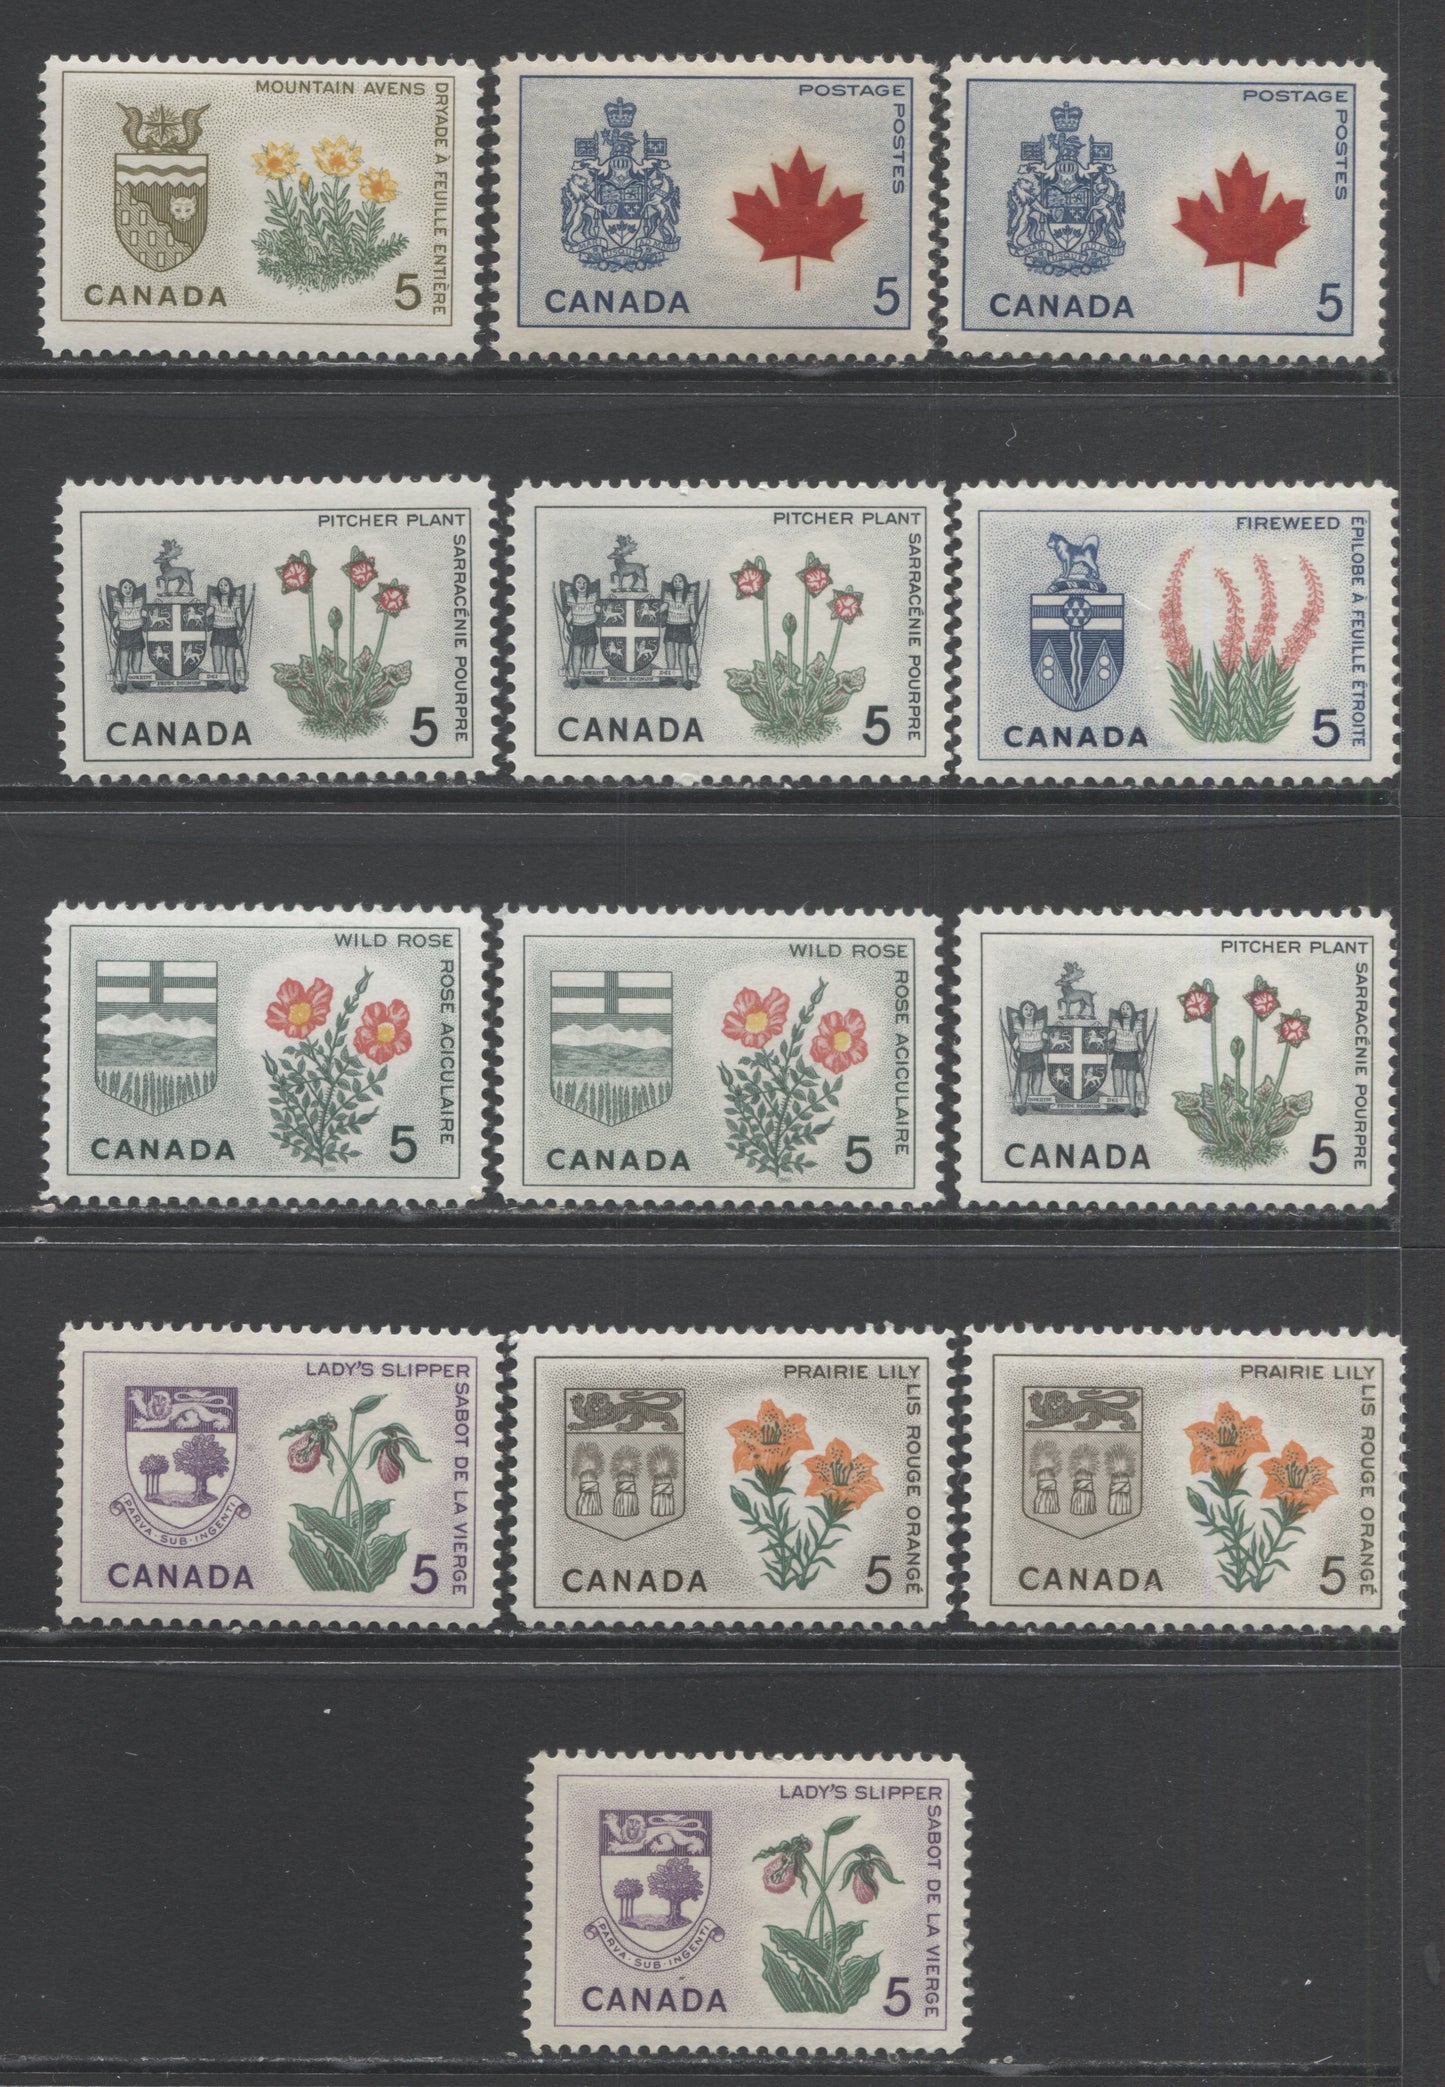 Lot 395 Canada #424-429Ai 5c Multicolored Flowers, 1964-1966 Floral Emblems Issue, 13 Fine NH and VFNH Singles Showing Both Dull & Fluorescent Varieties For Most Of The Stamps